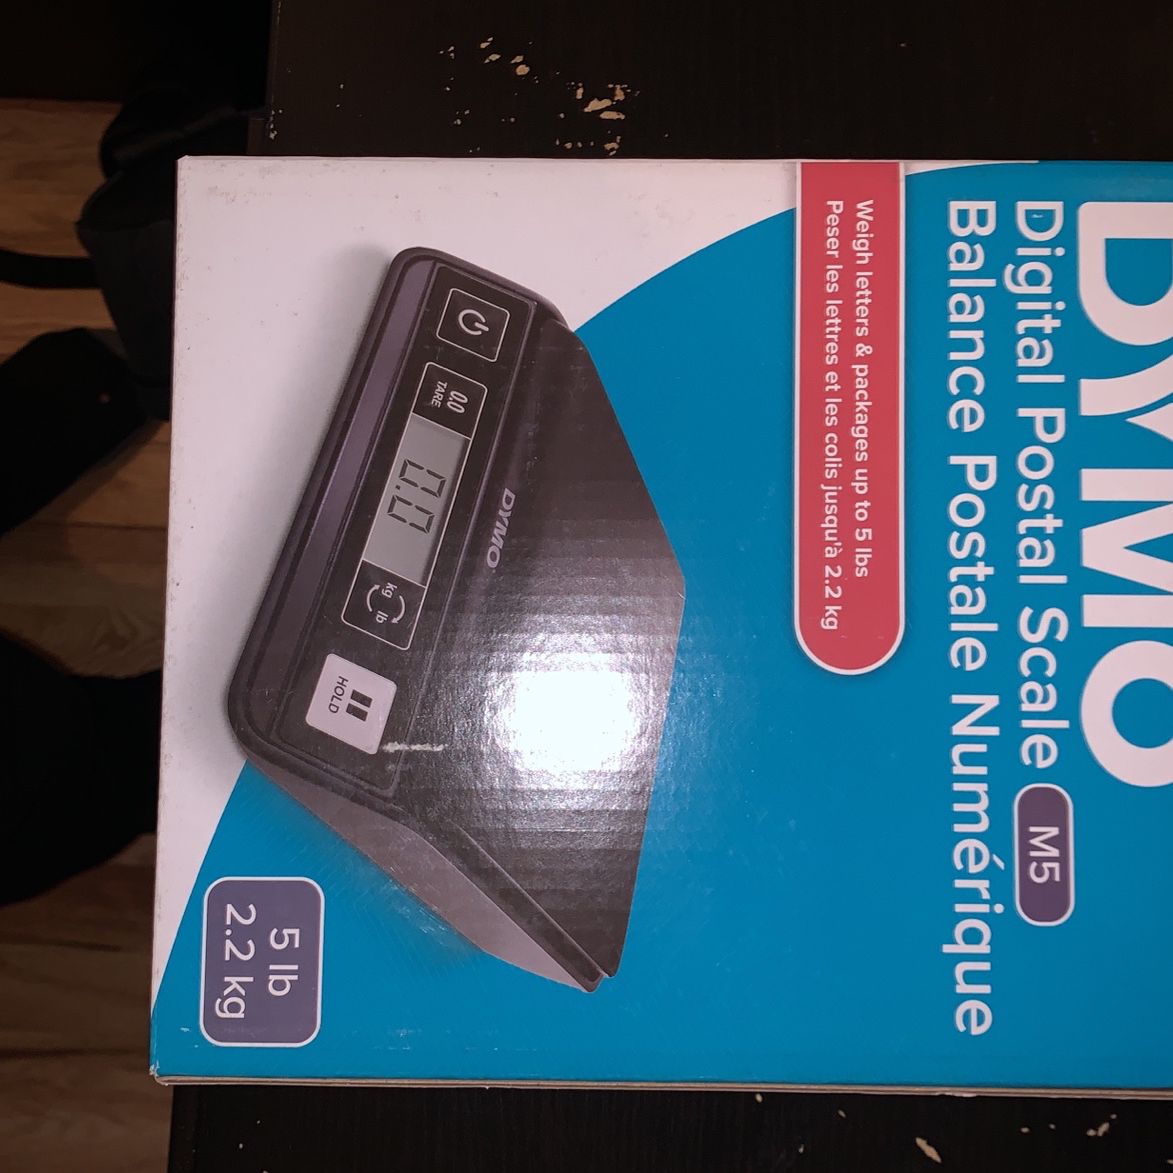 NEW Dymo M5 Digital Postal Scale Weigh Letters & Packages Up To 5 lbs